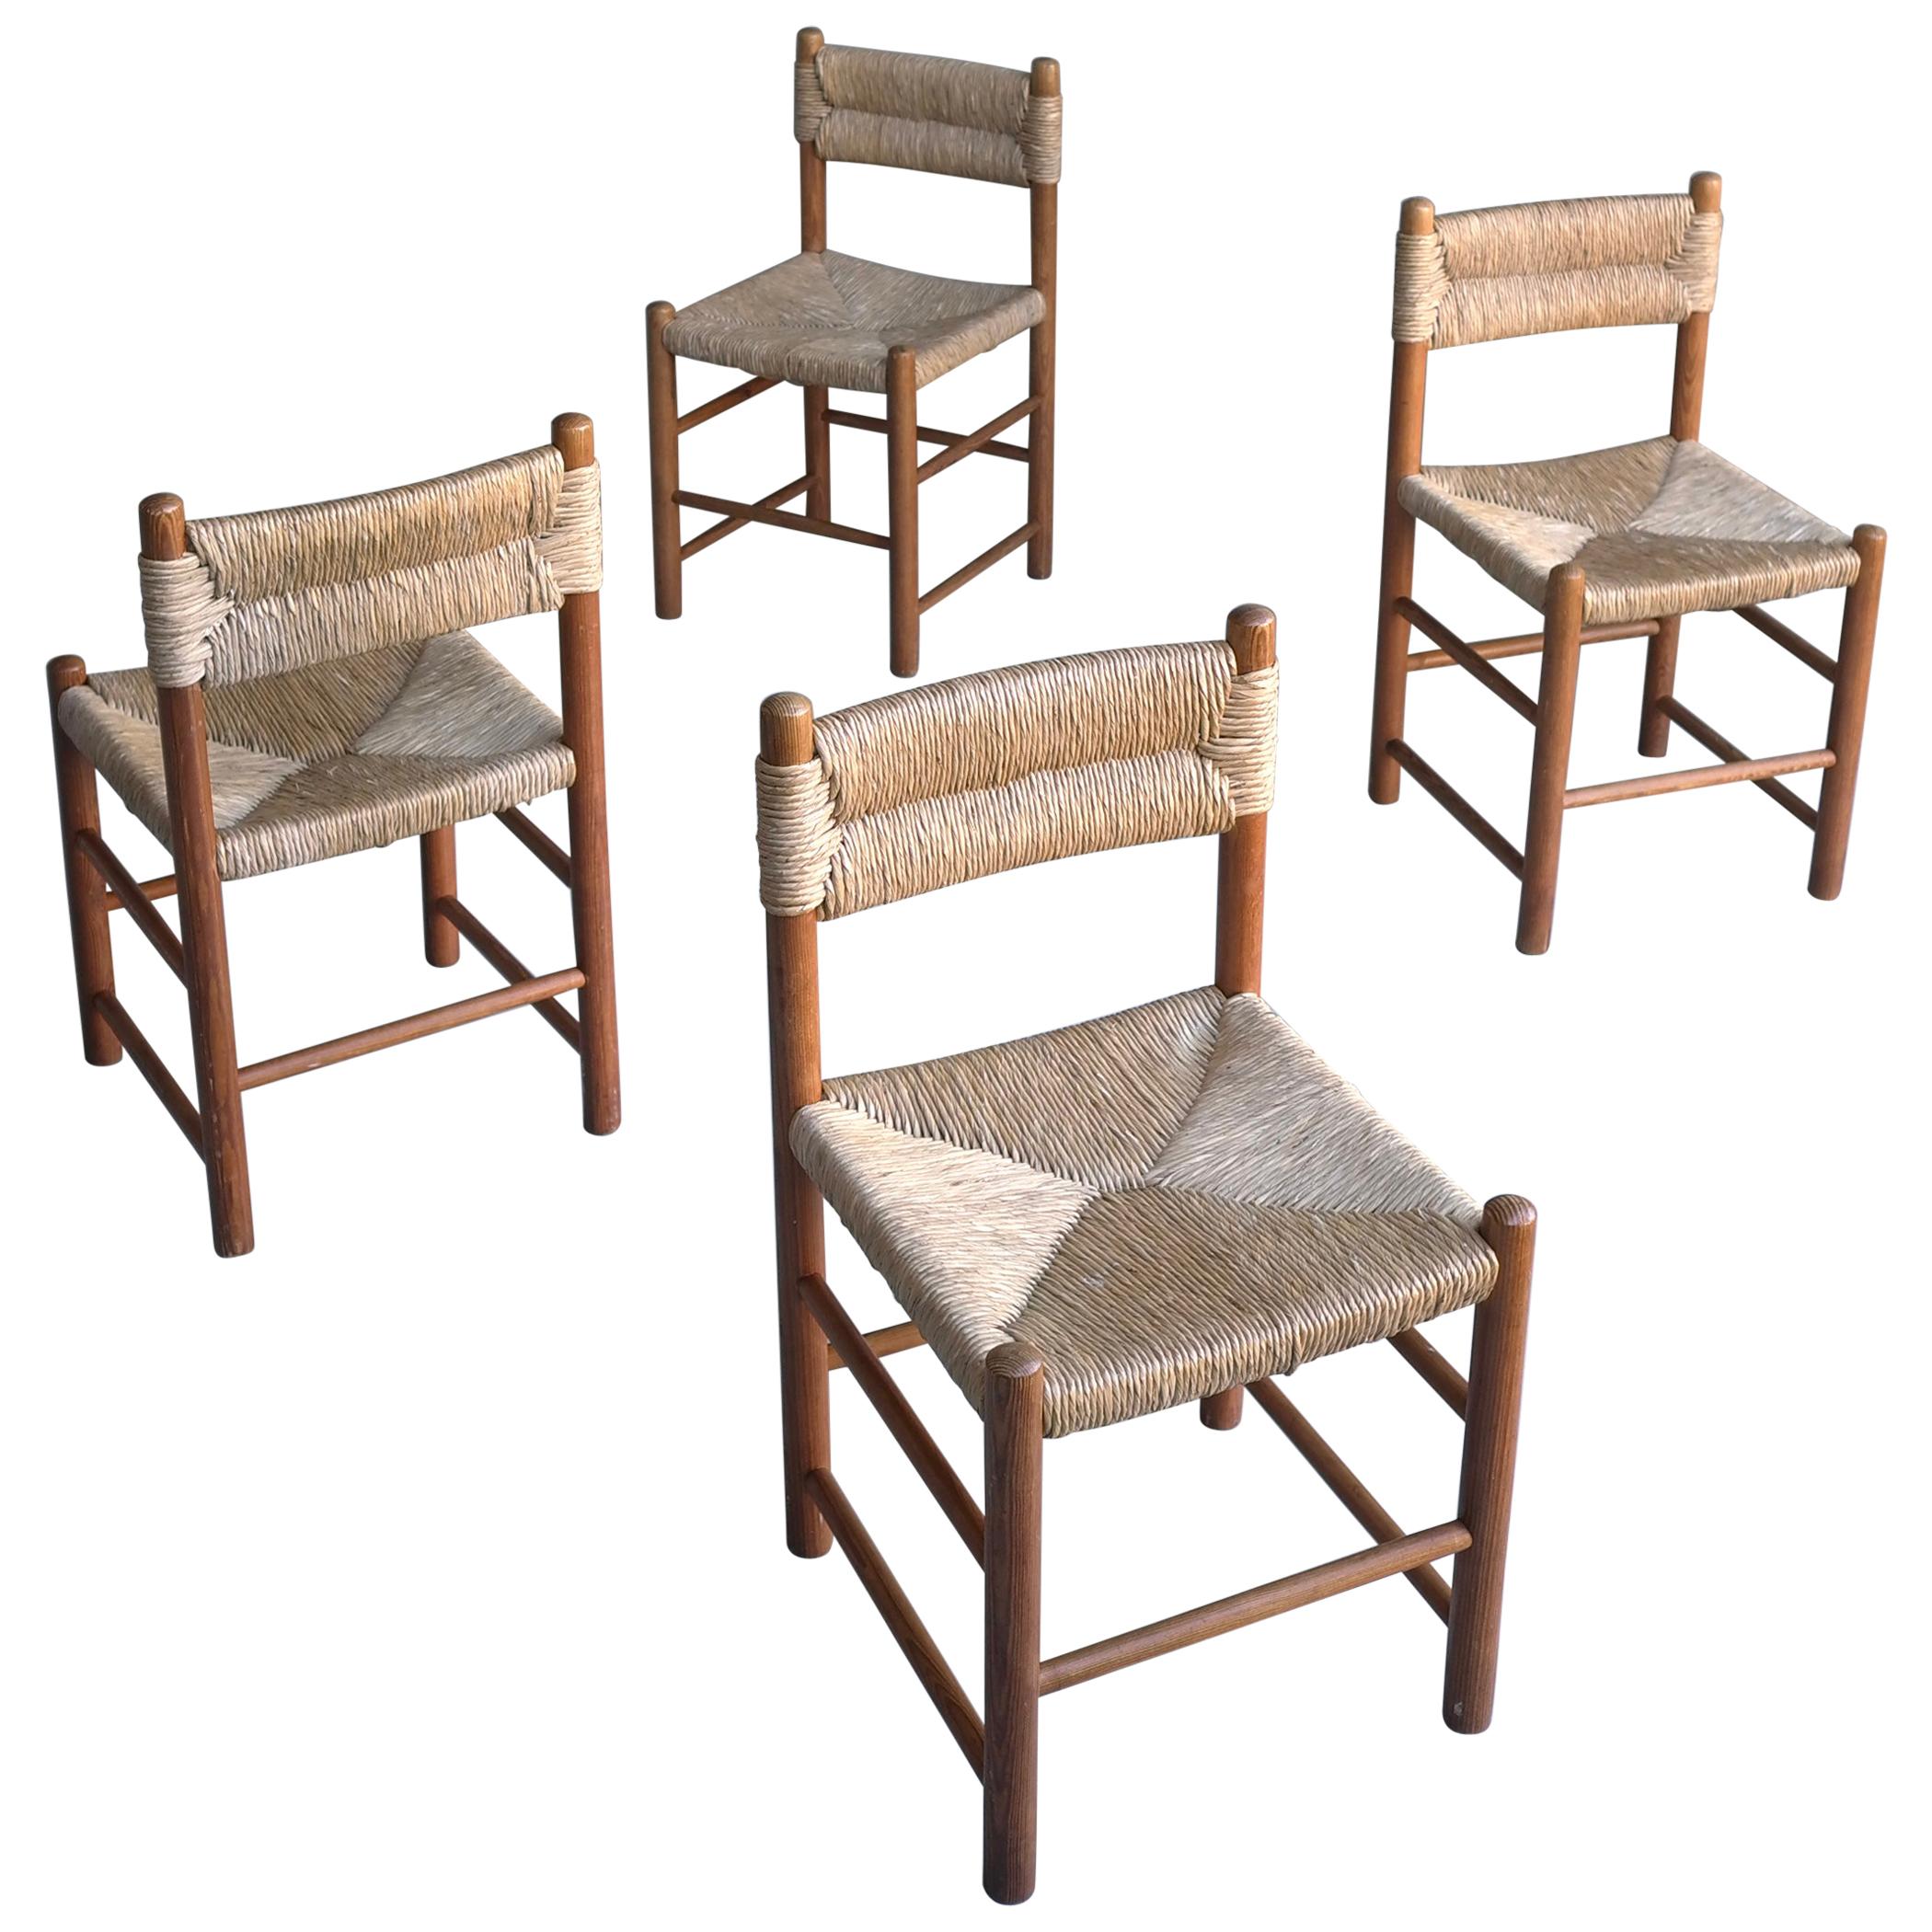 Charlotte Perriand, Set of Four Rush and wood "Dordogne" Chairs, France, 1960s